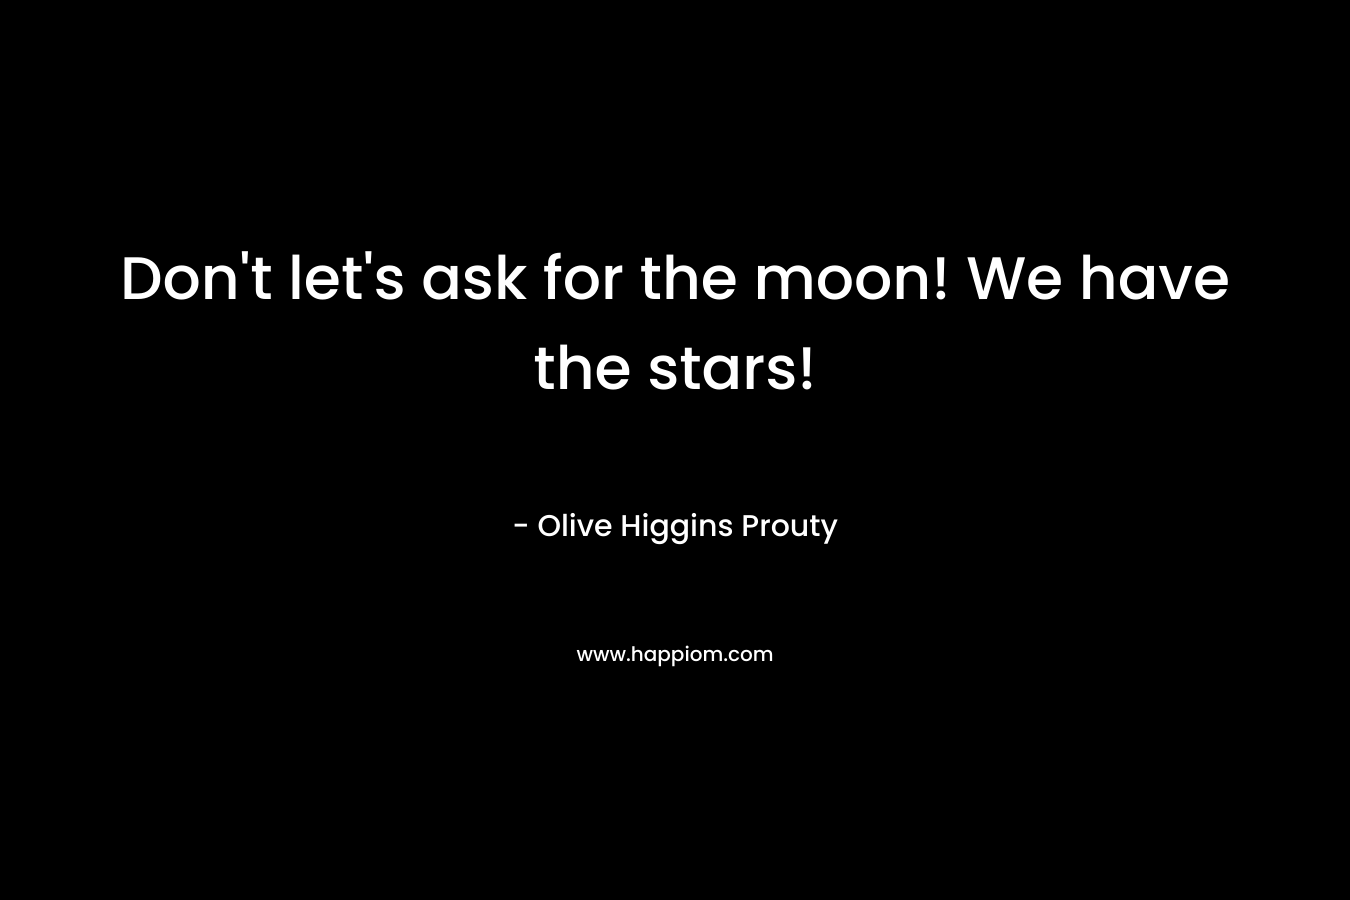 Don't let's ask for the moon! We have the stars!